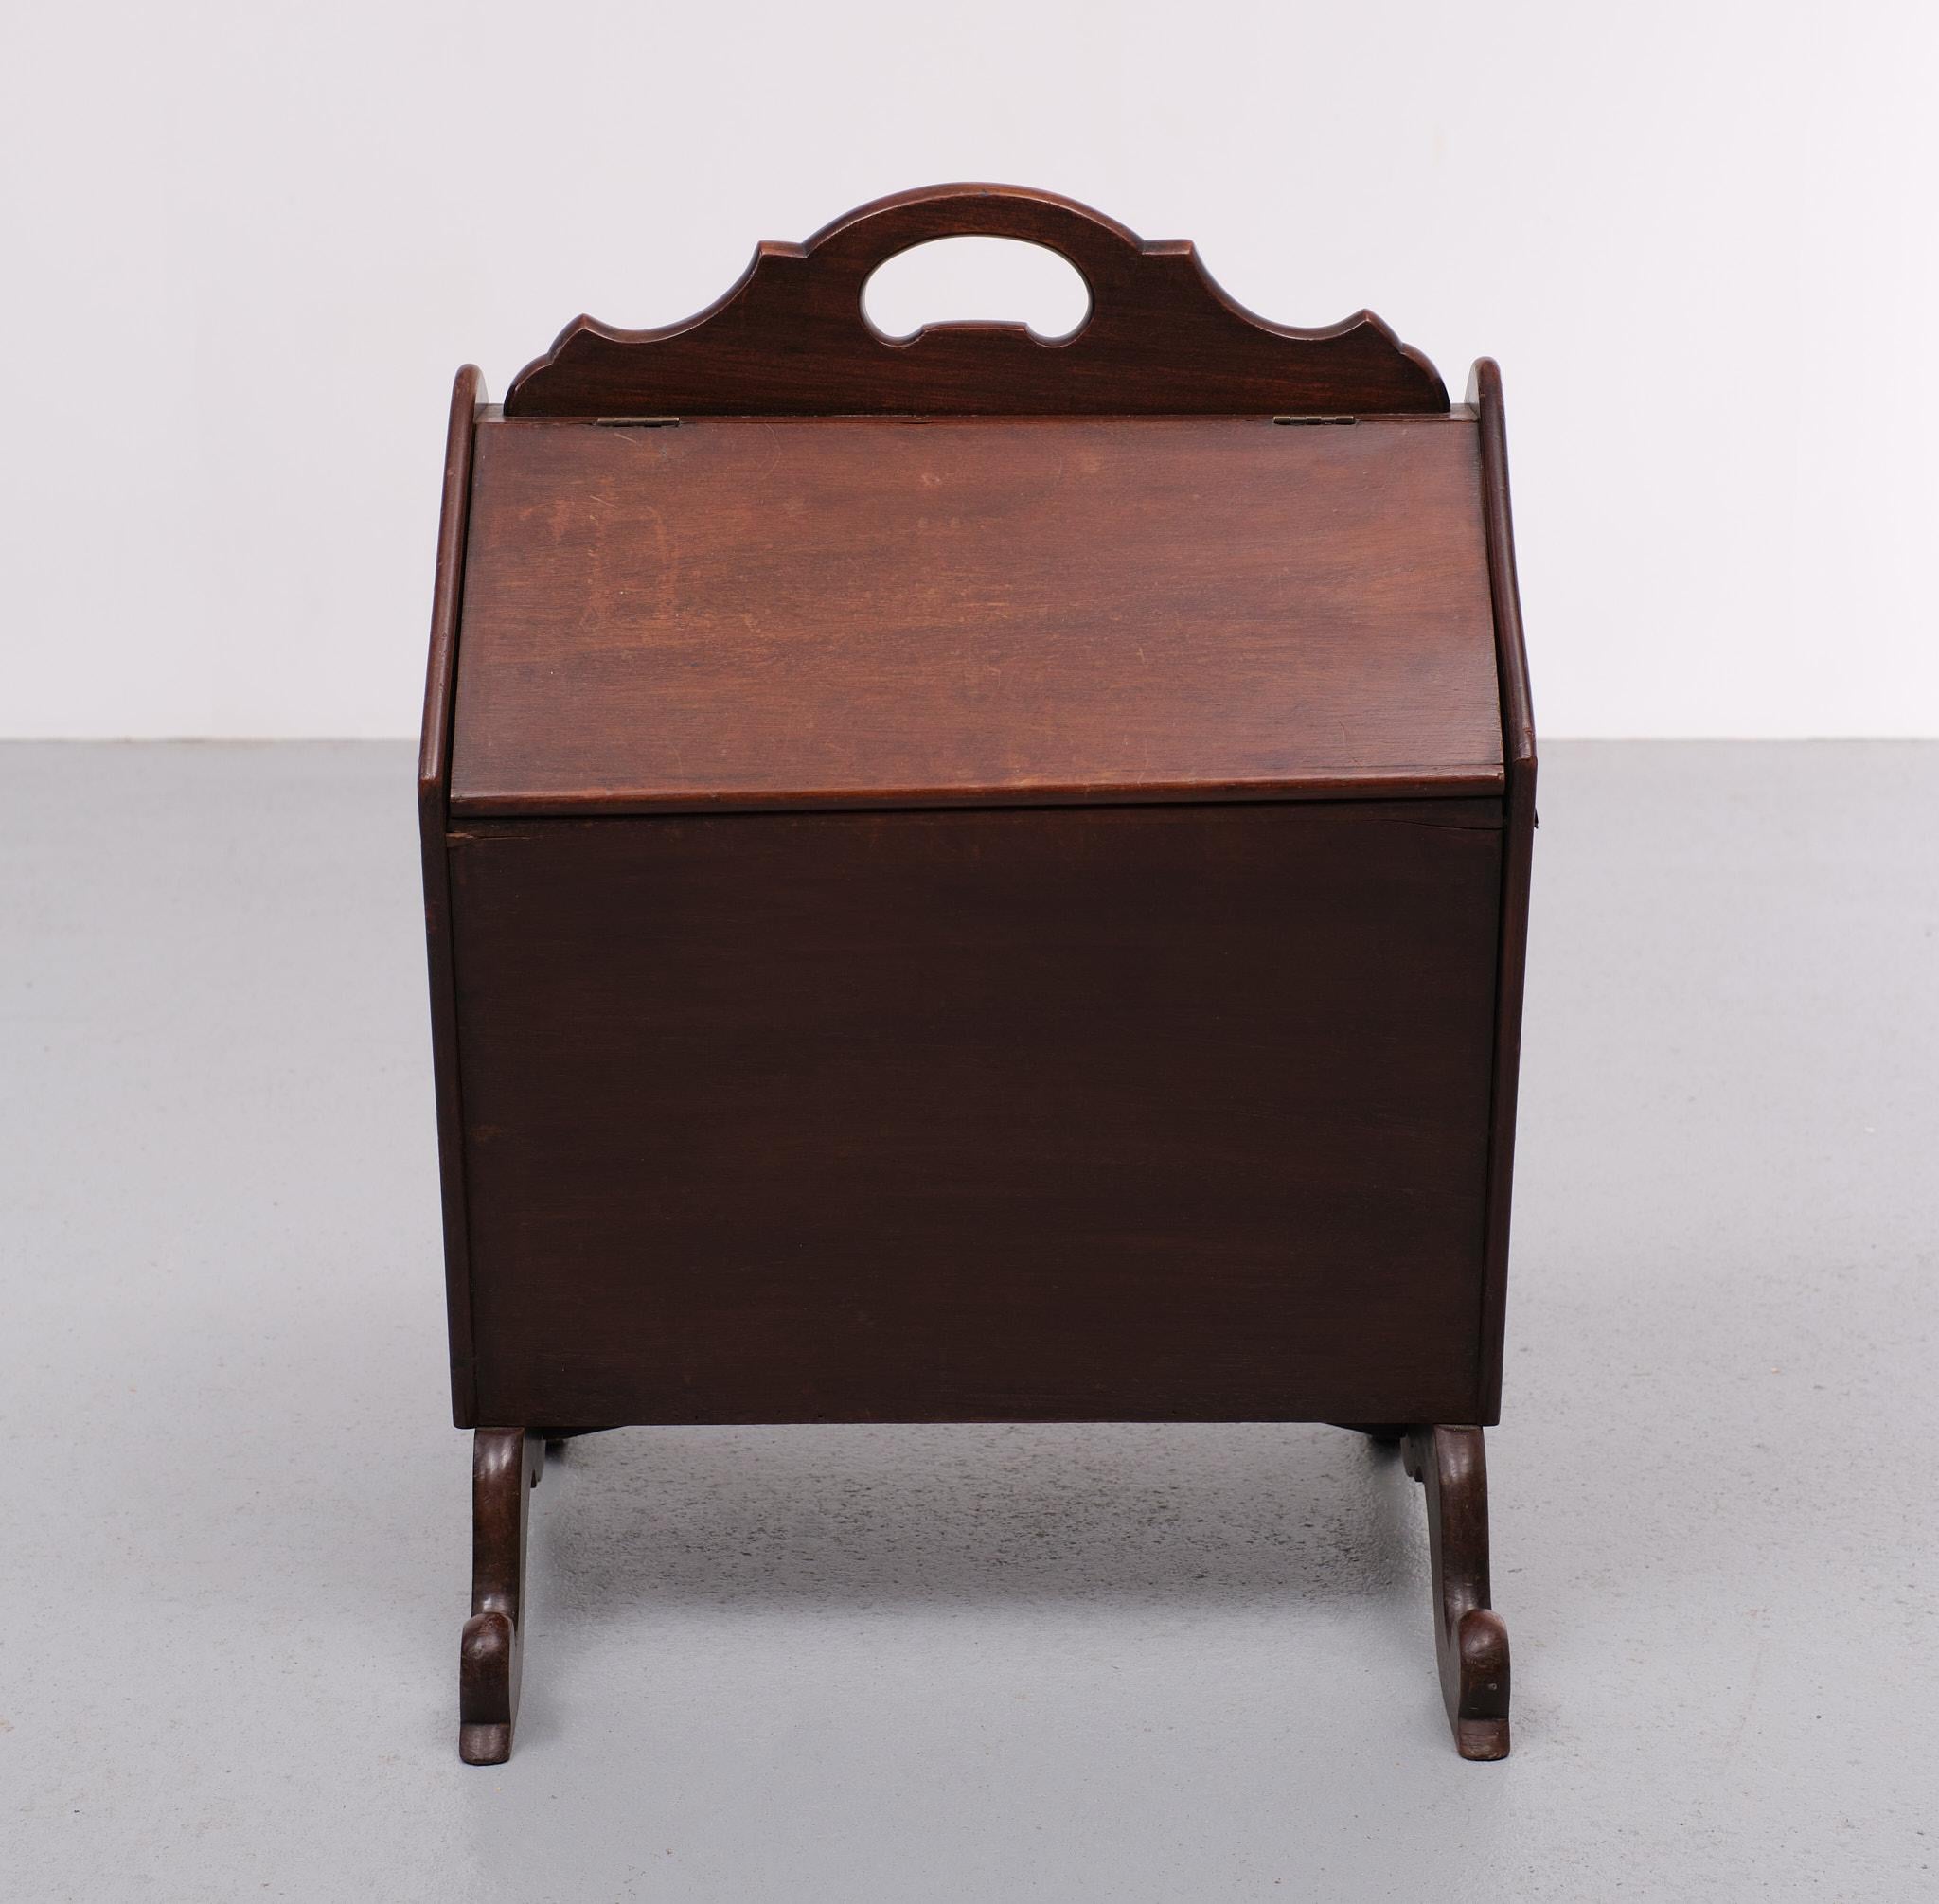 Antique Mahogany Magazine Holder 1870s Holland  In Good Condition For Sale In Den Haag, NL